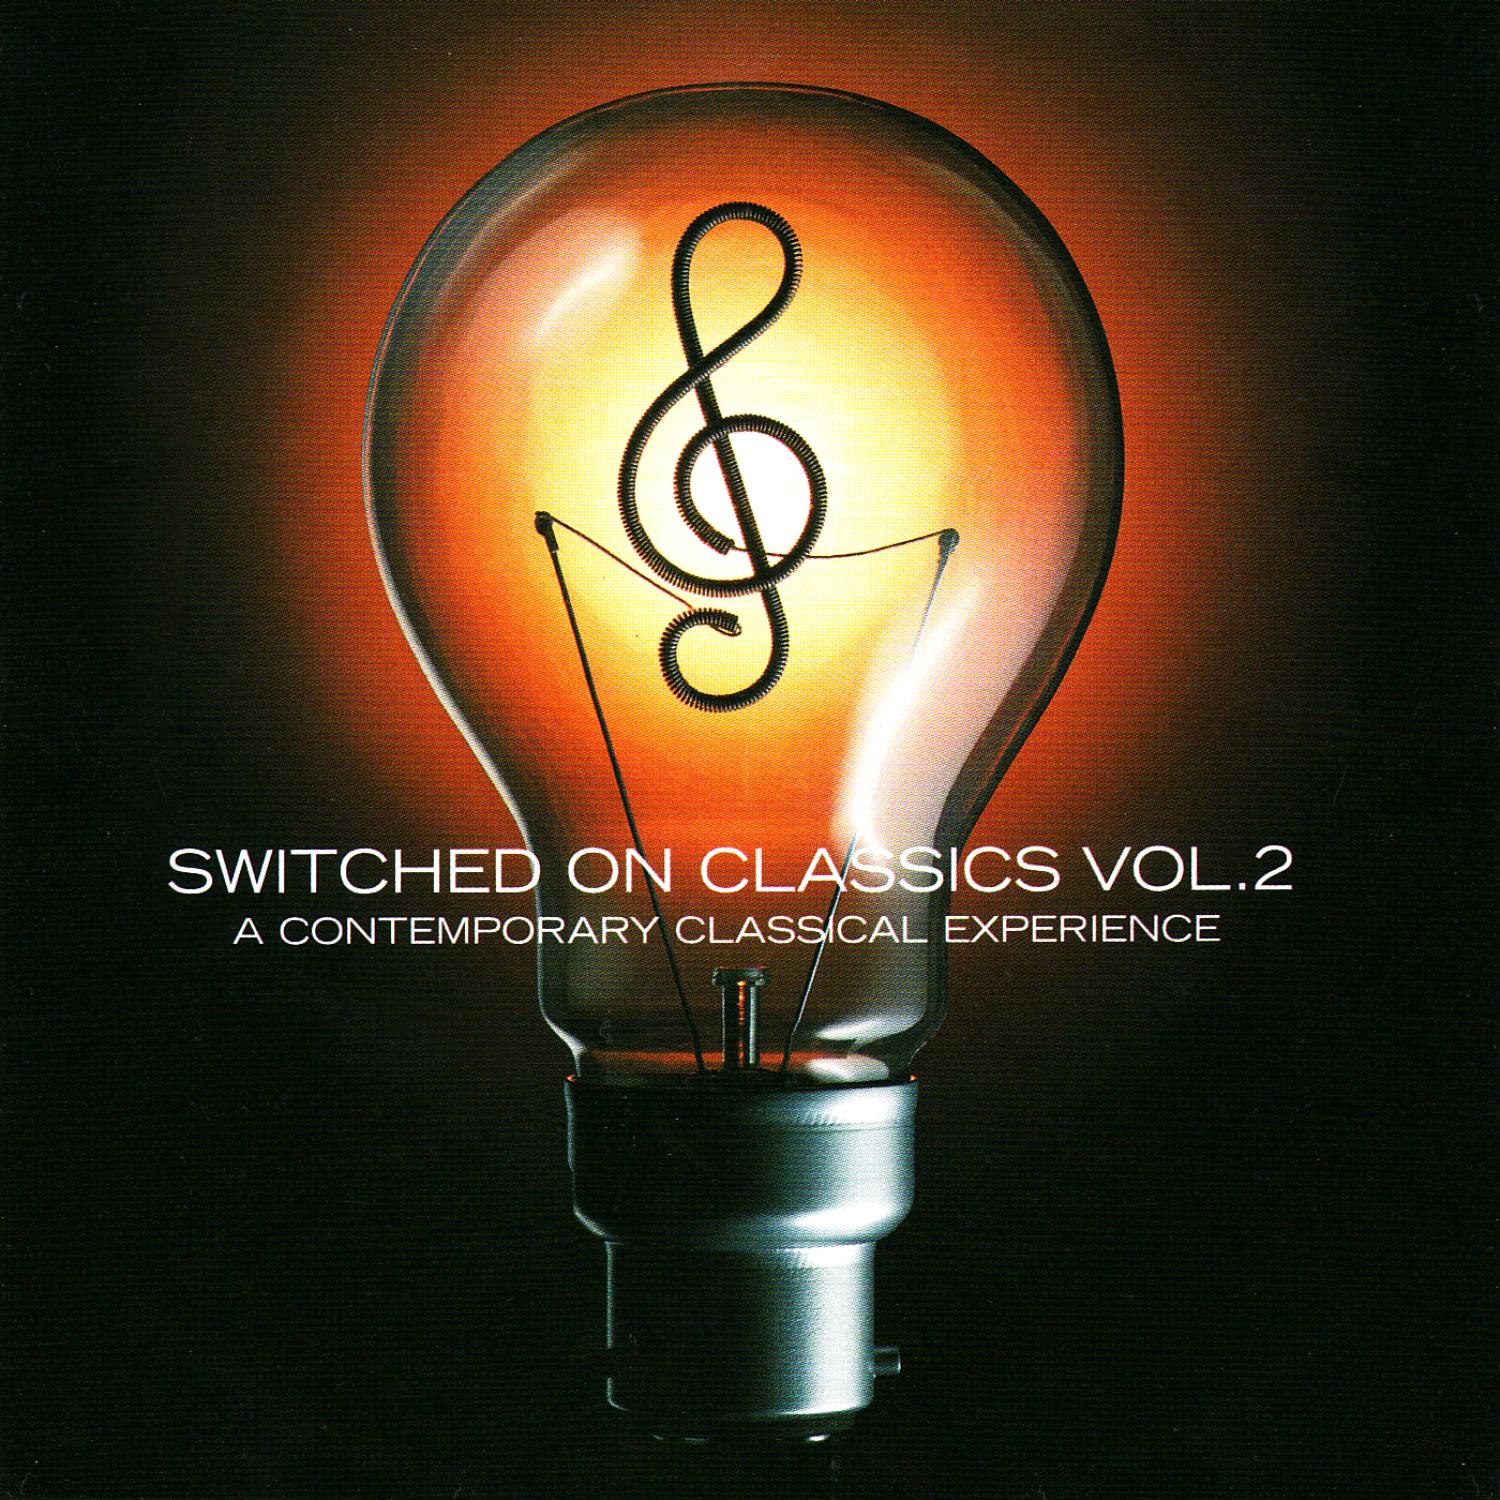 Switched On Classics Vol. 2 - A Contemporary Classical Experience